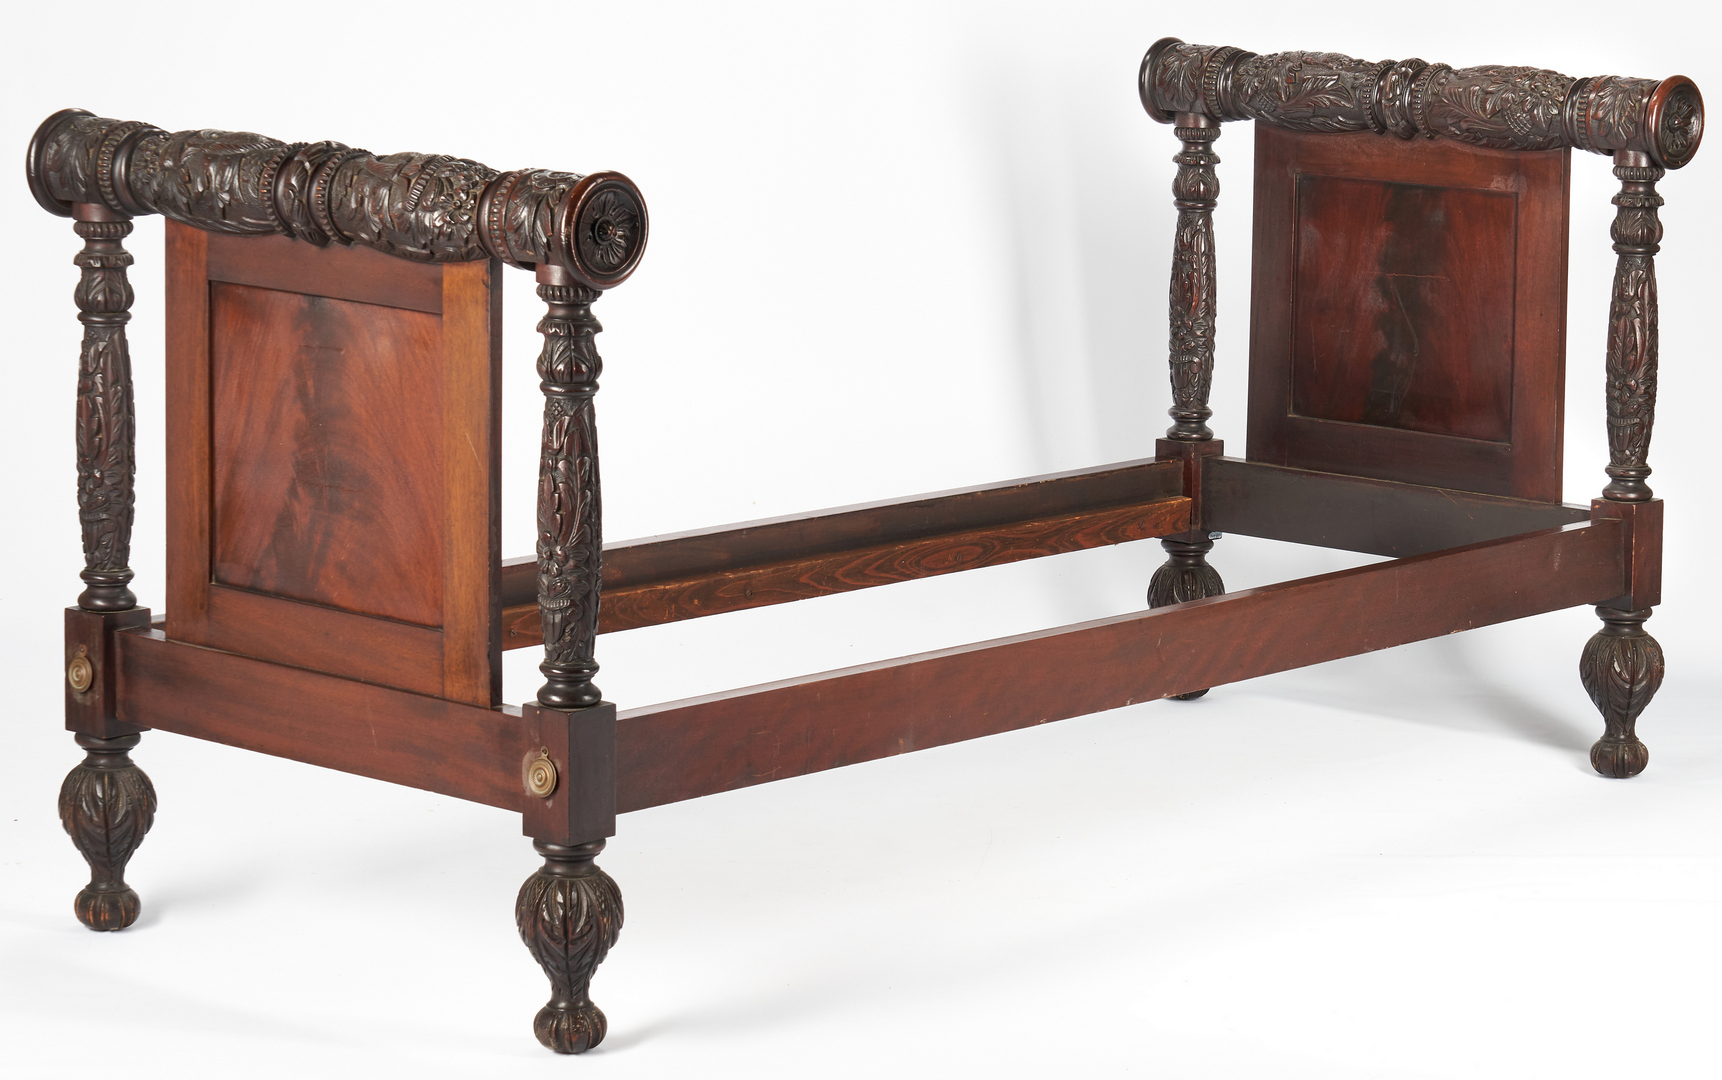 Lot 412: Classical Revival Carved Daybed